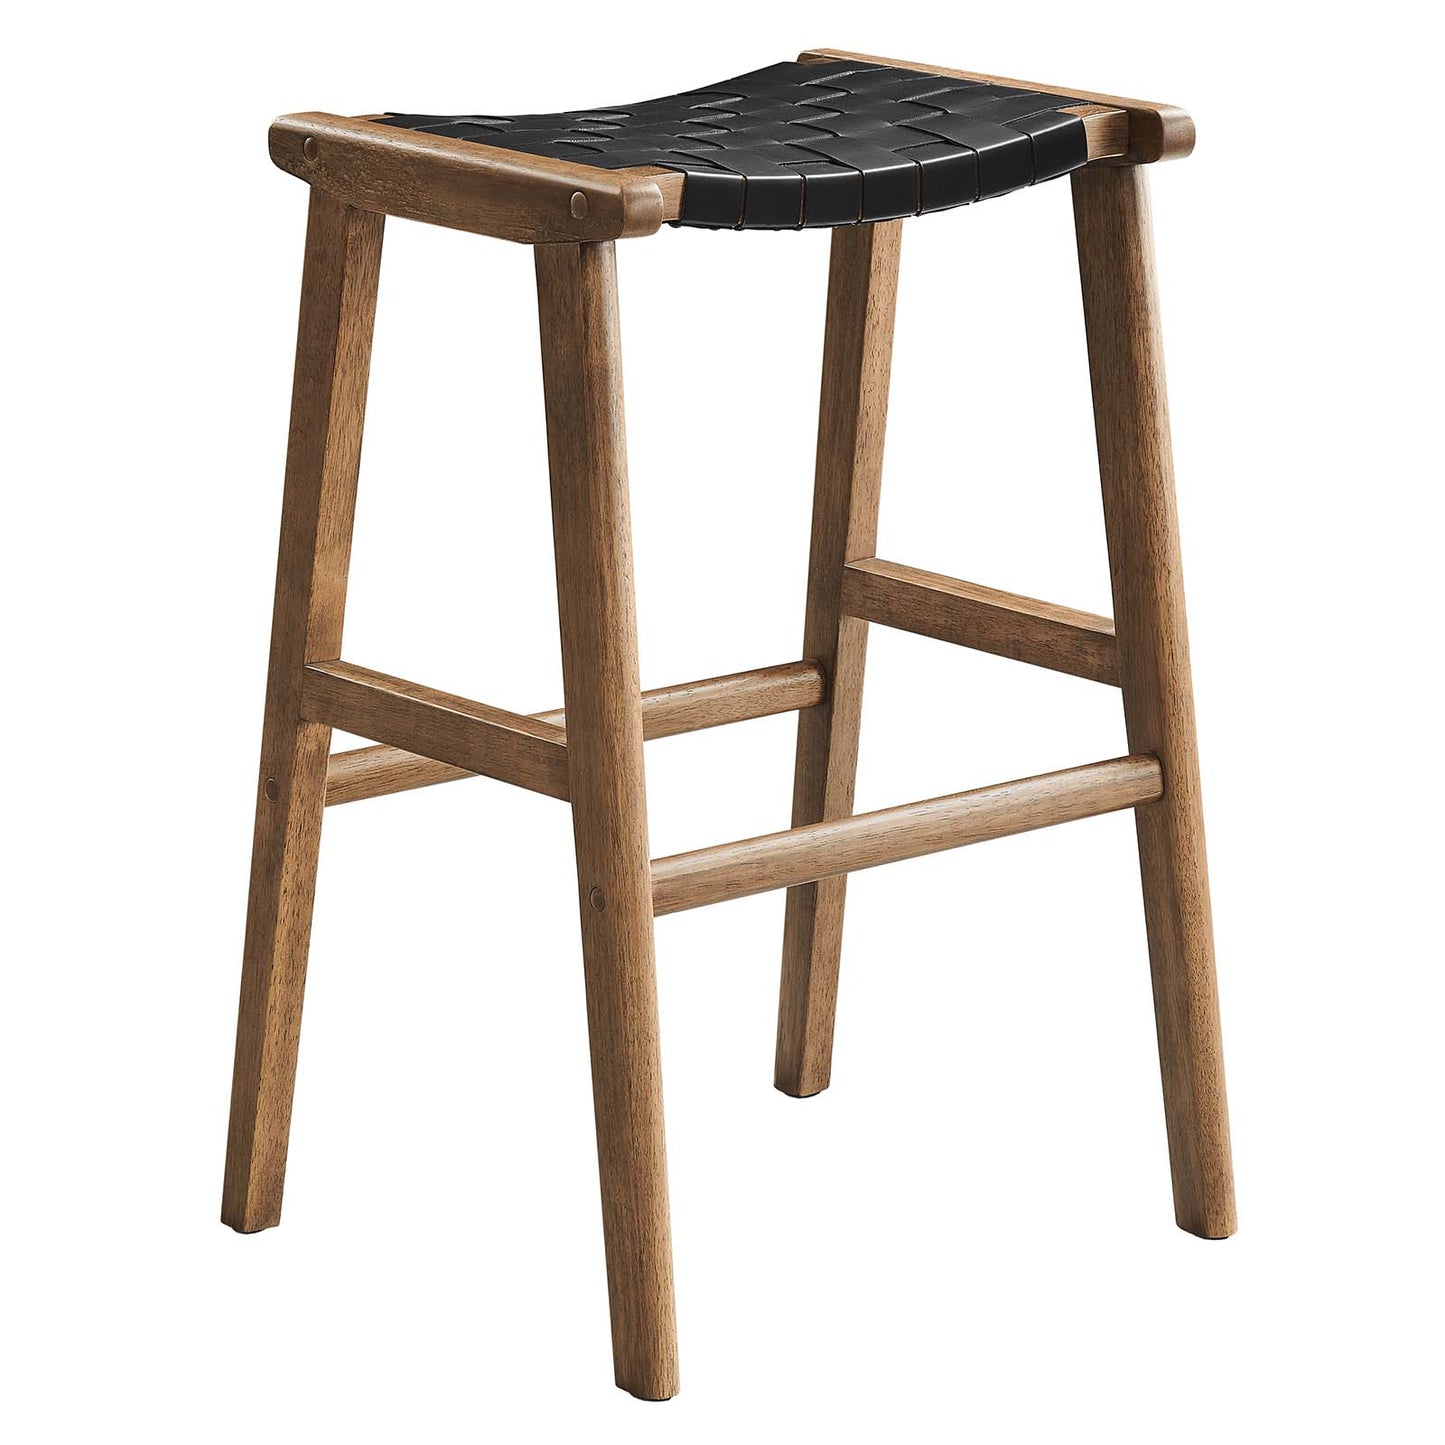 Saoirse Faux Leather Wood Bar Stool - Set of 2 By Modway - EEI-6549 | Bar Stools | Modway - 12